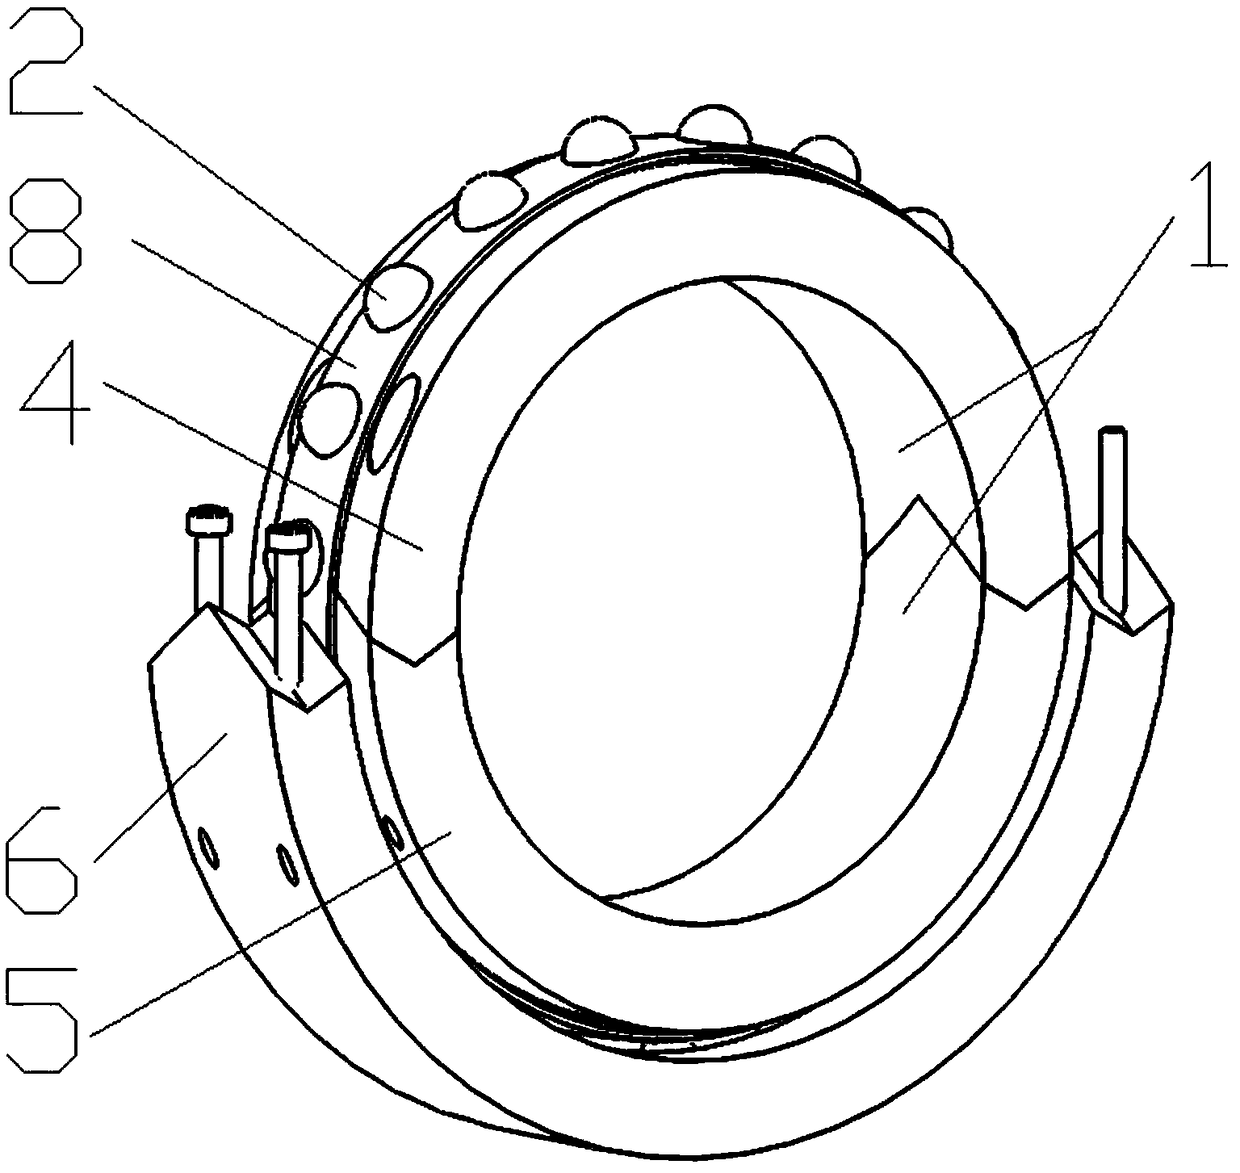 Semi-ring coupled precision rolling bearing